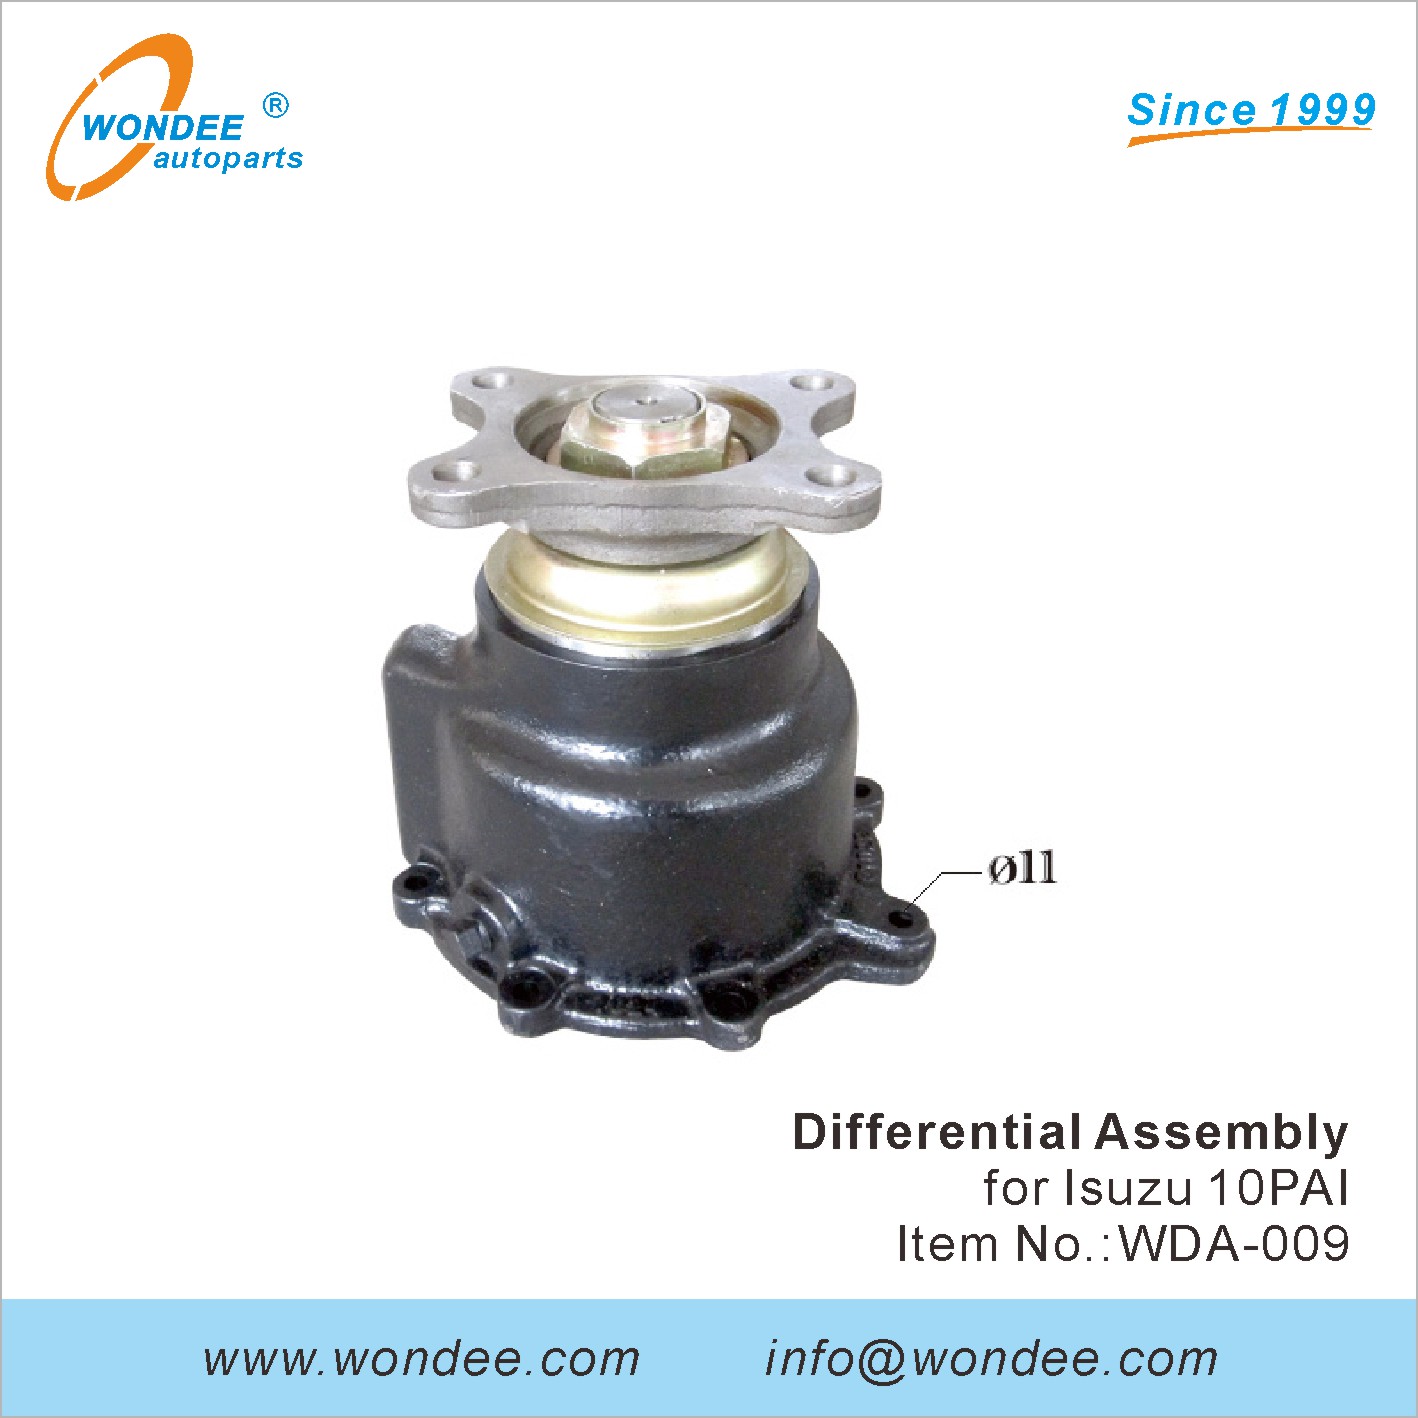 WONDEE differential assembly (9)